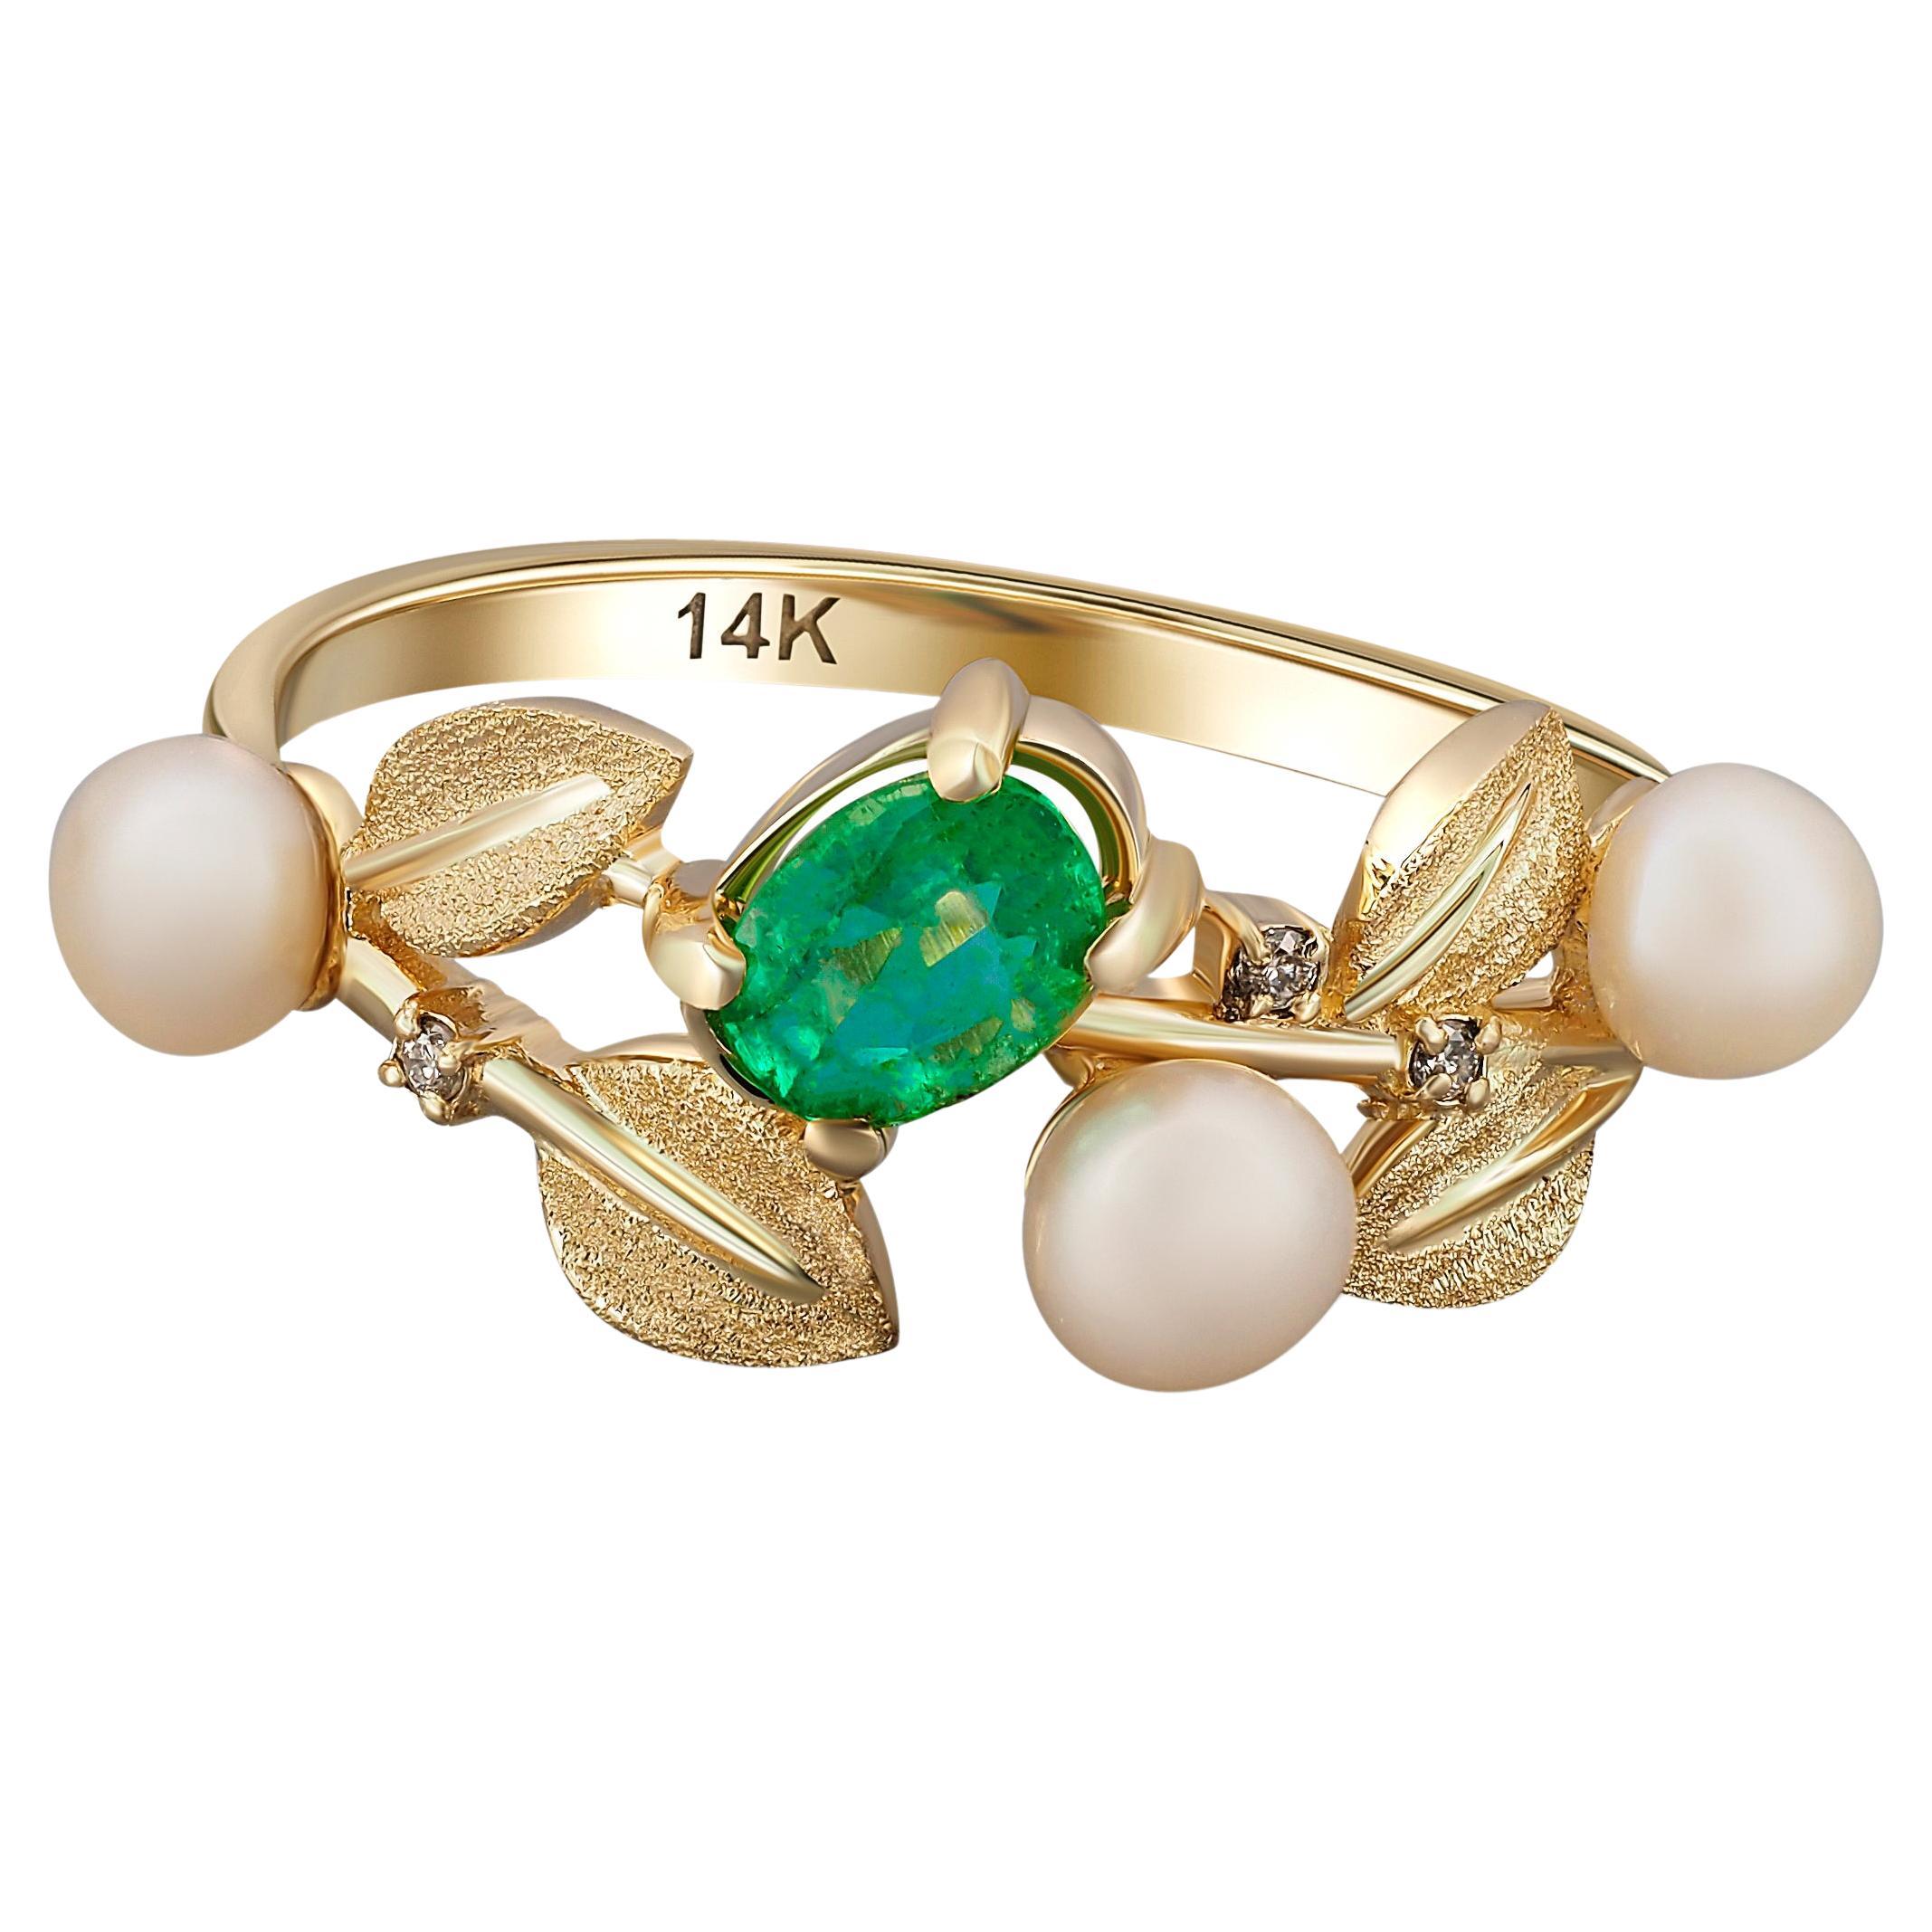 Flower ring with emerald in 14k gold. 